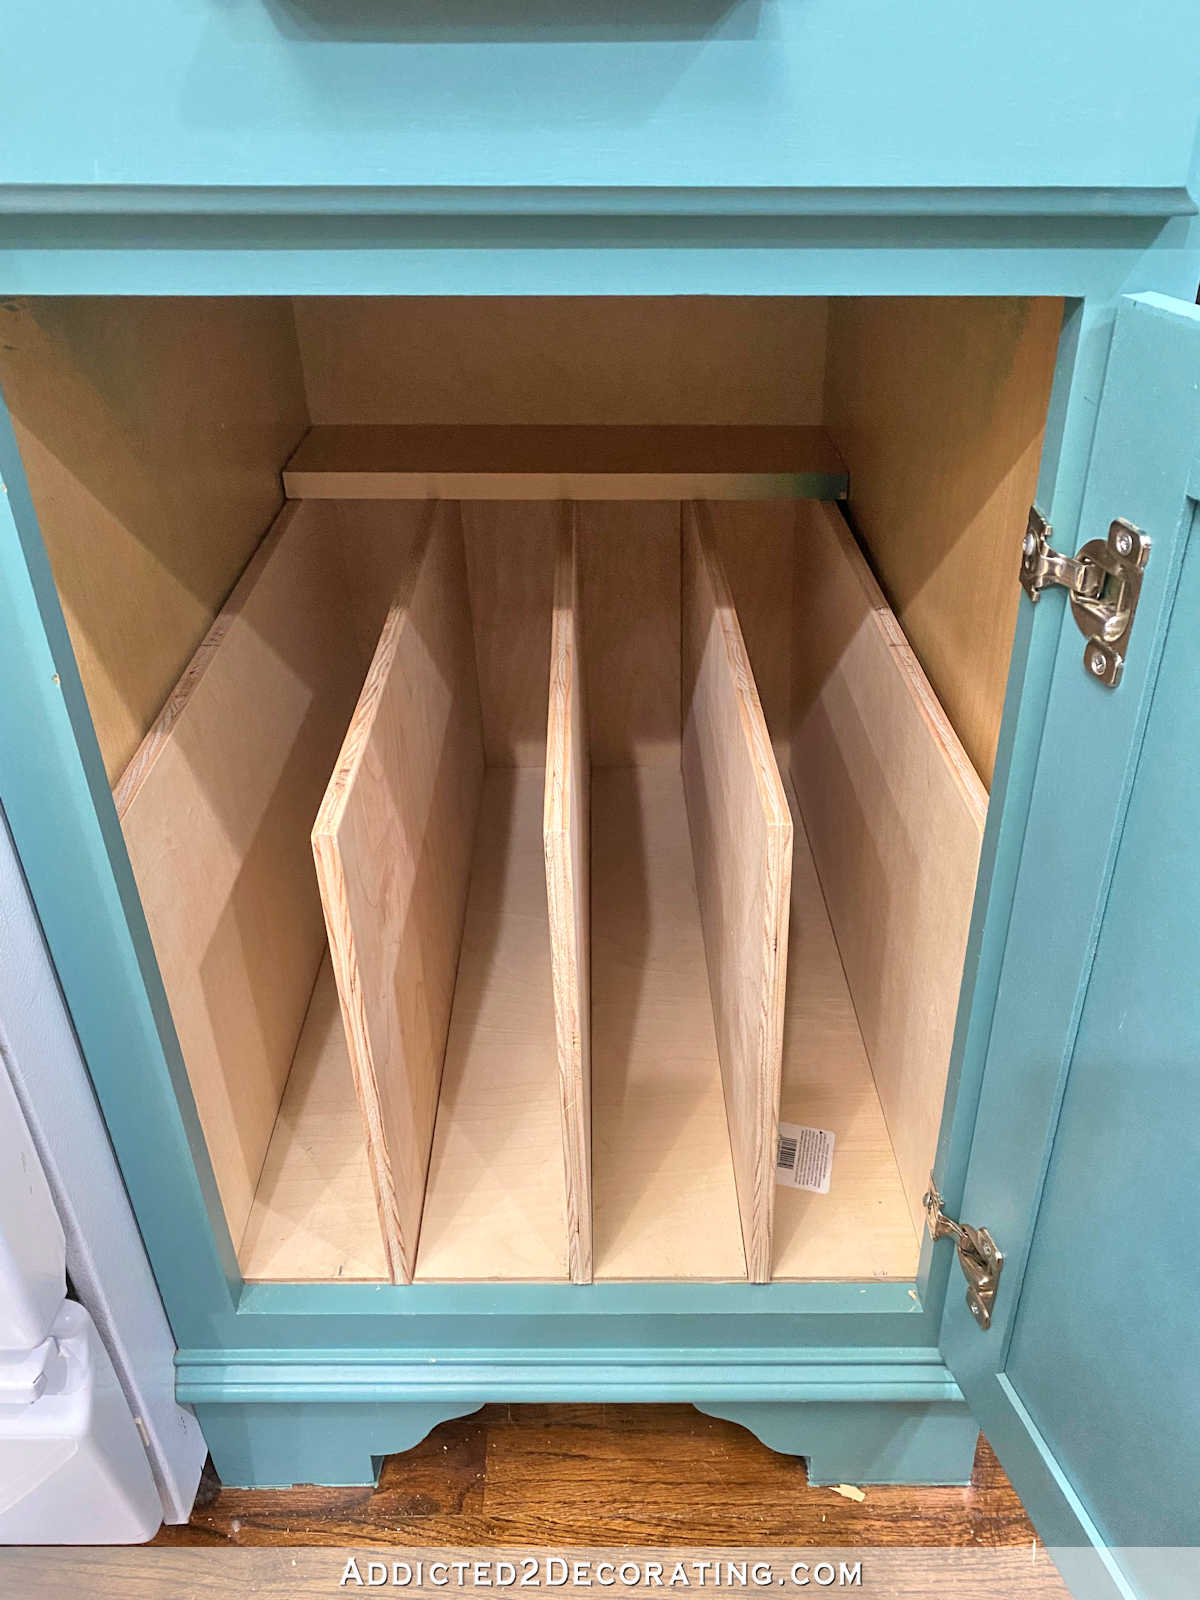 DIY pan organizer -- dry fit all of the pieces together before cutting the sides and dividers